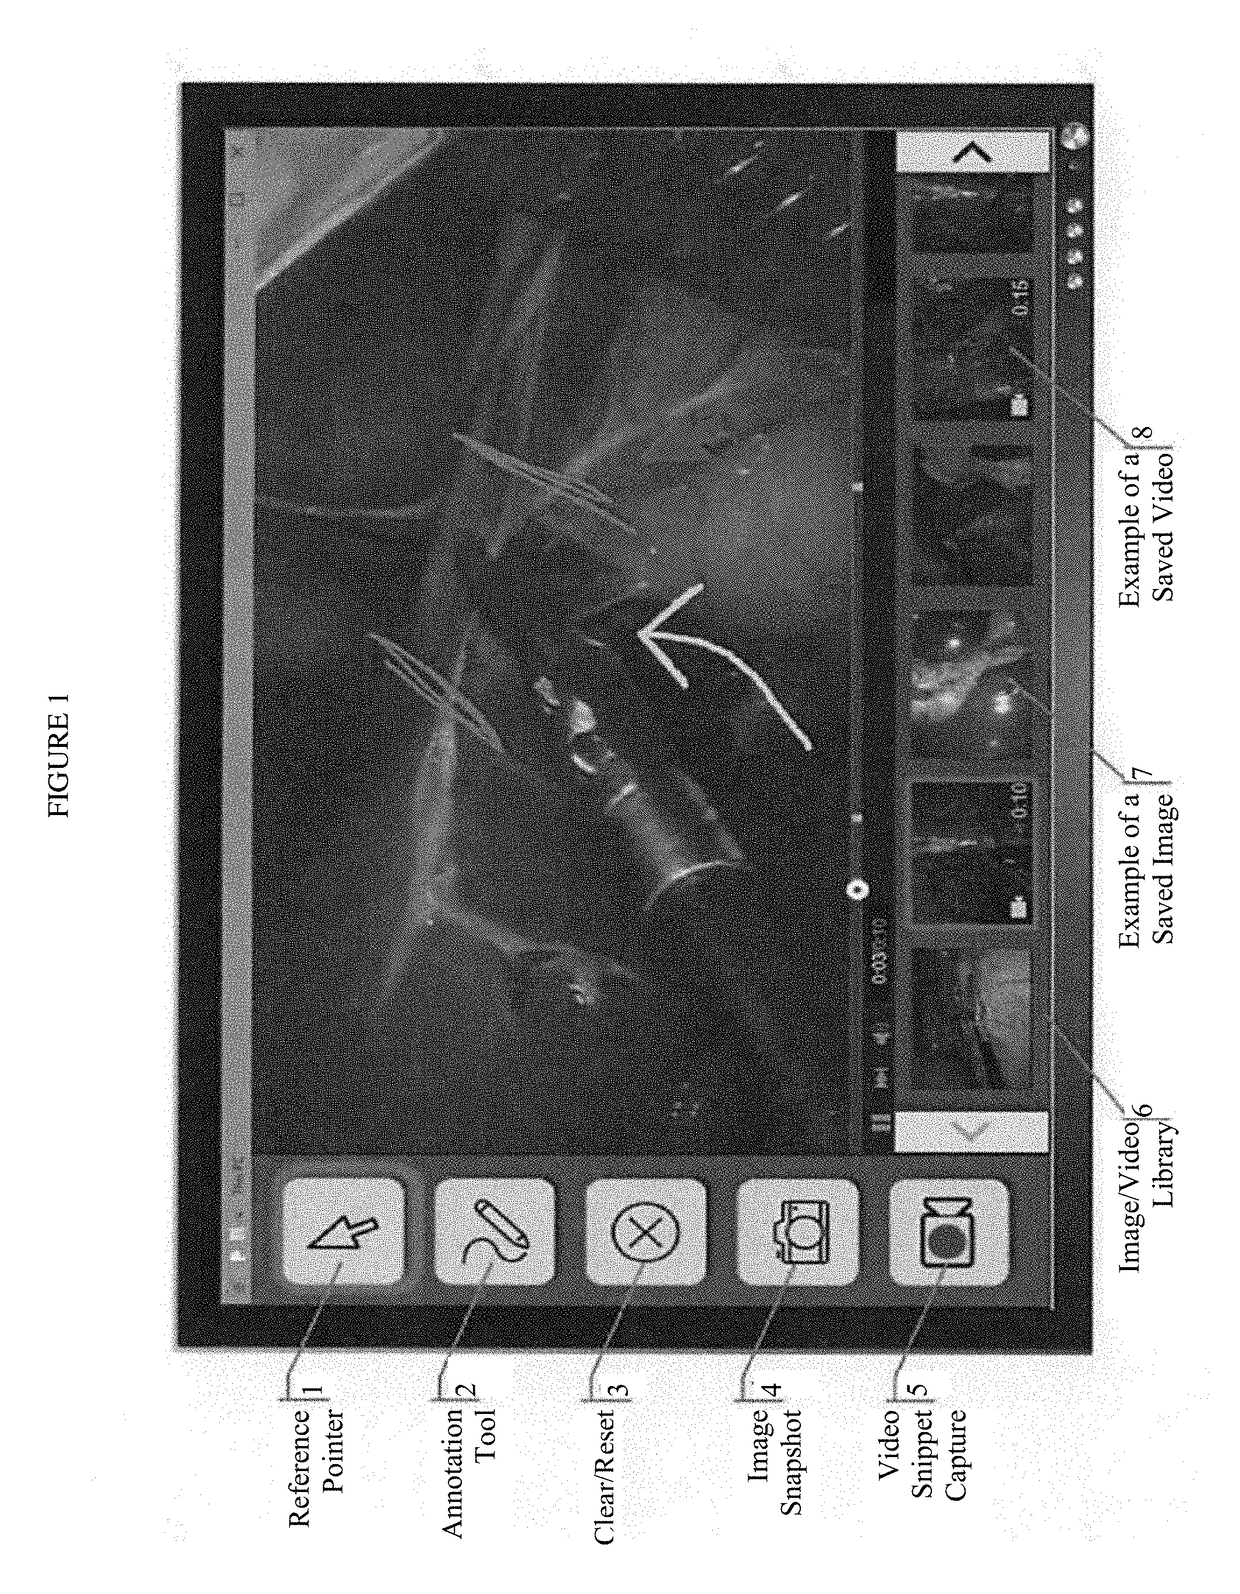 Annotation of endoscopic video using gesture and voice commands